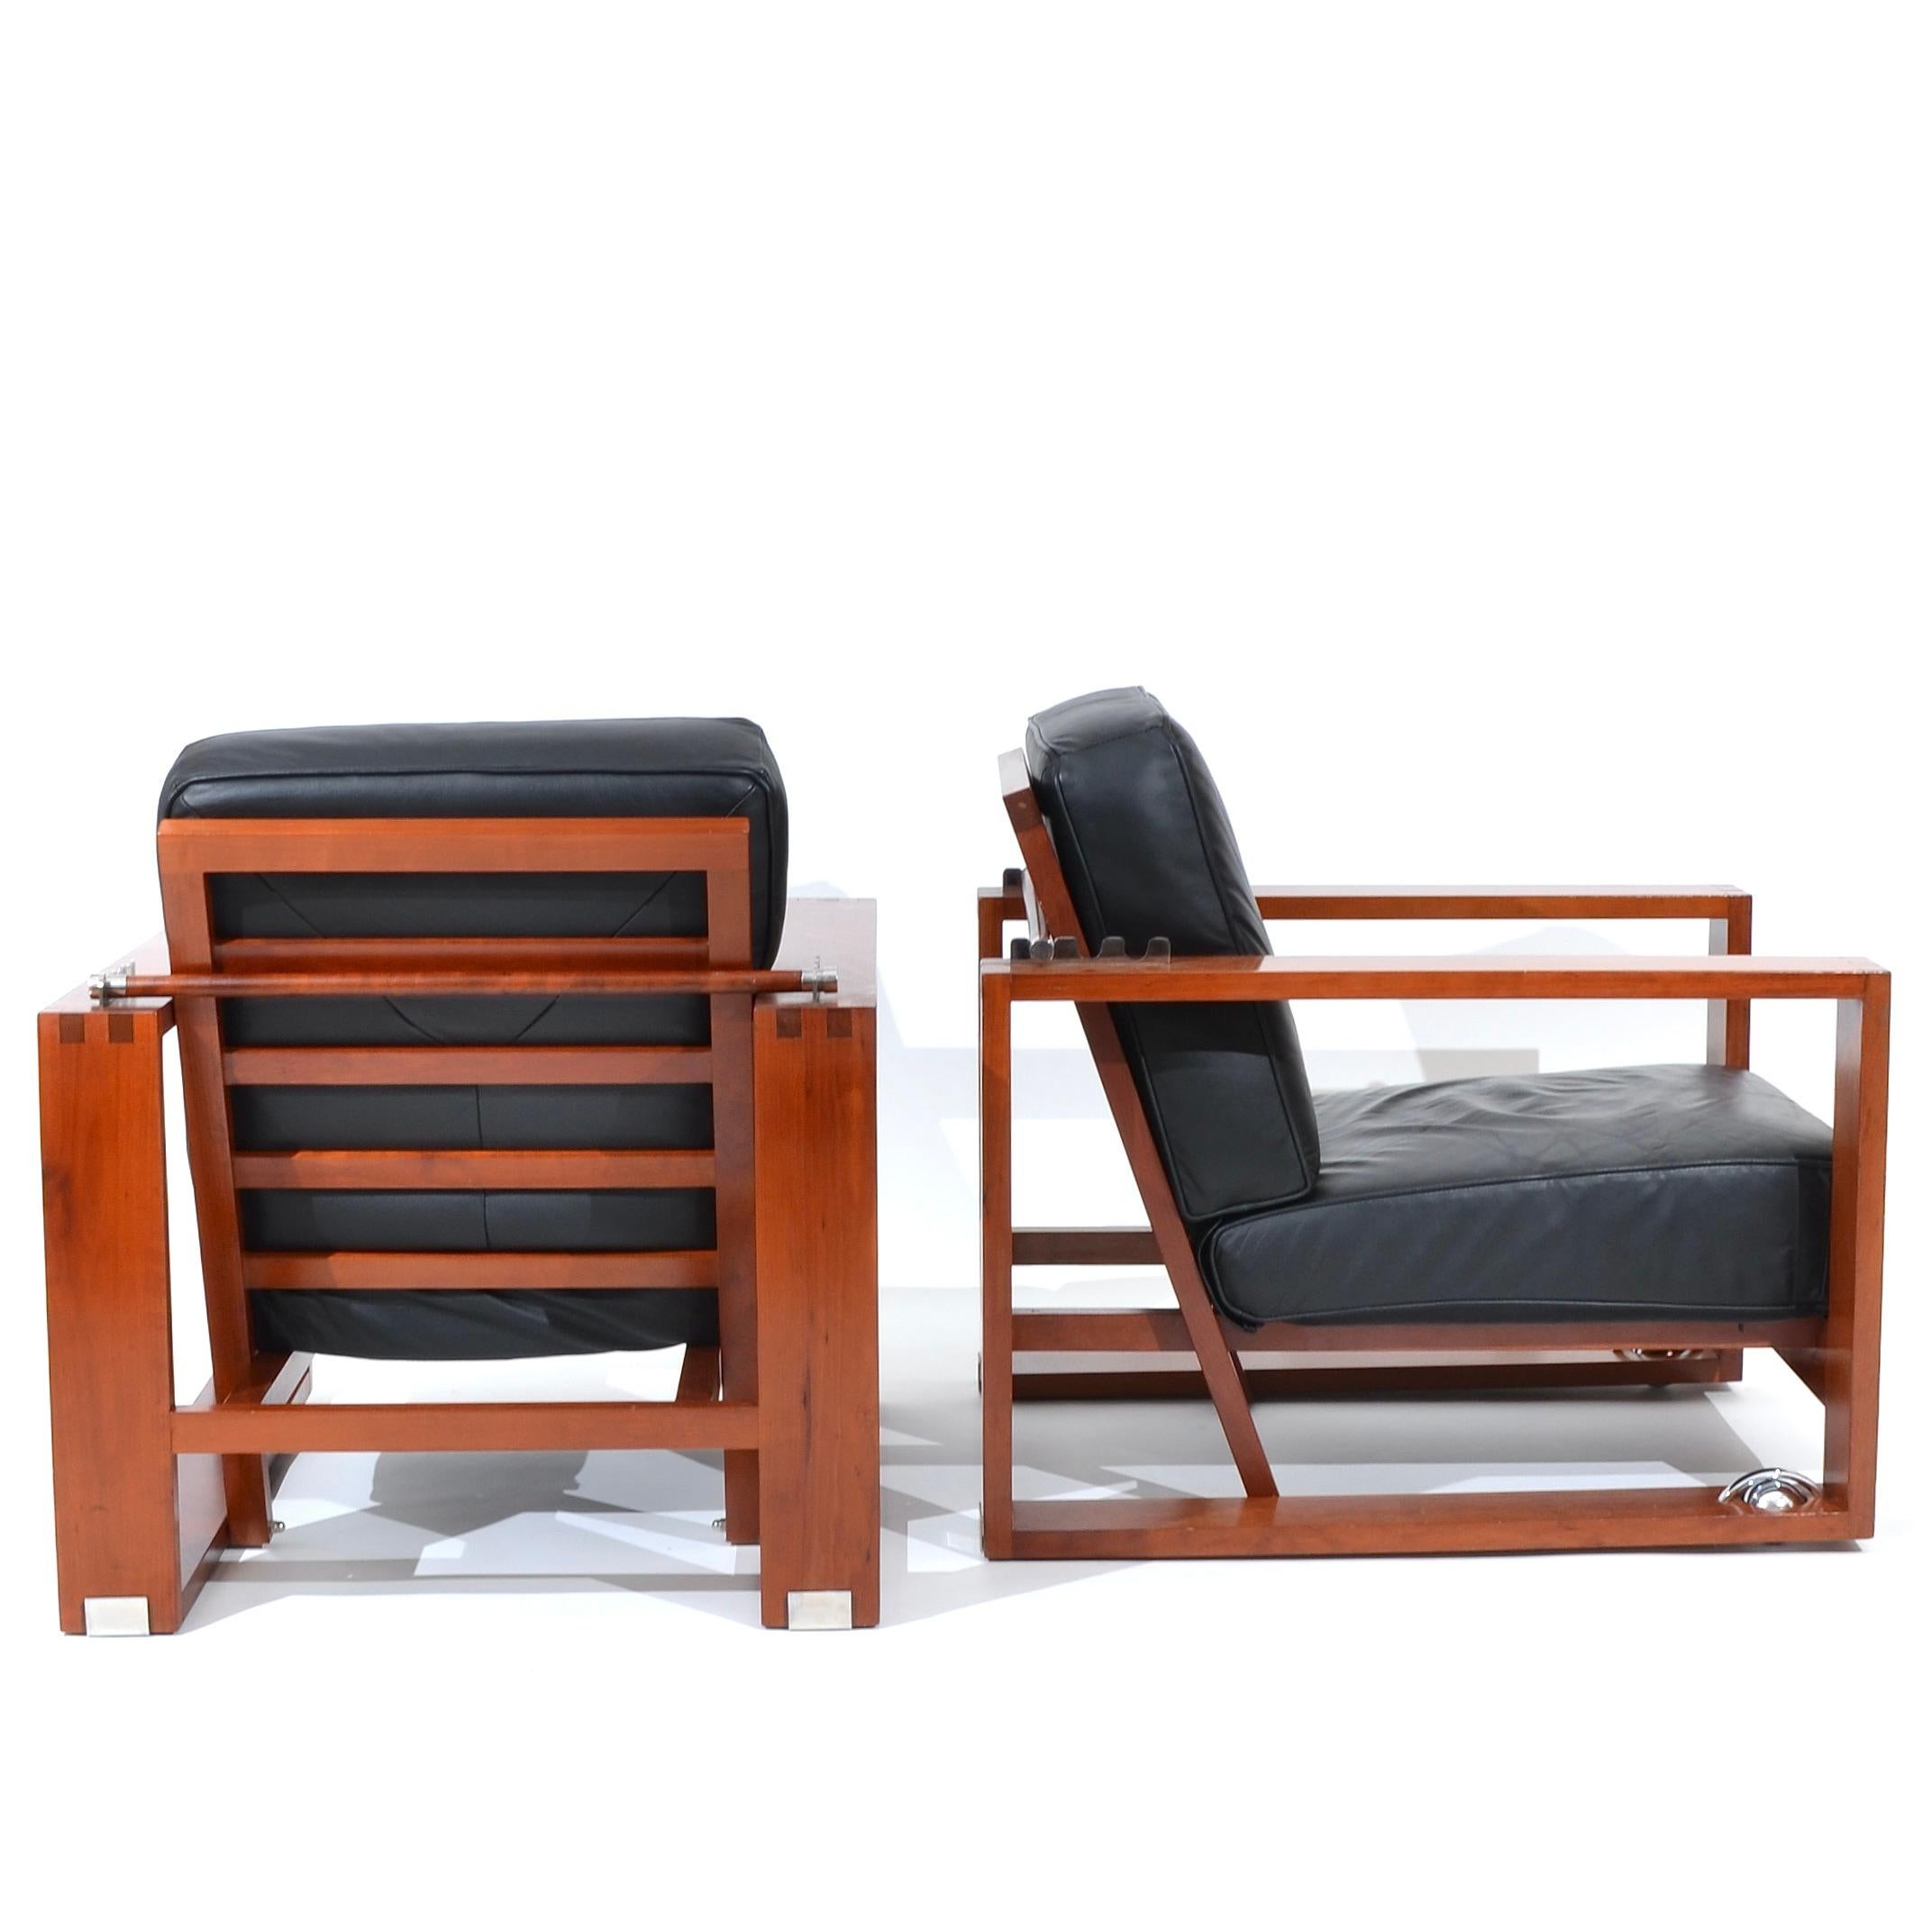 A luxury yacht-like lounge, sit down and let yourself be carried away!

Solid cherry wood, black leather seats and a few details in chromed steel, this is the recipe for these two large French Roche Bobois armchairs.

Note the beautiful assembly